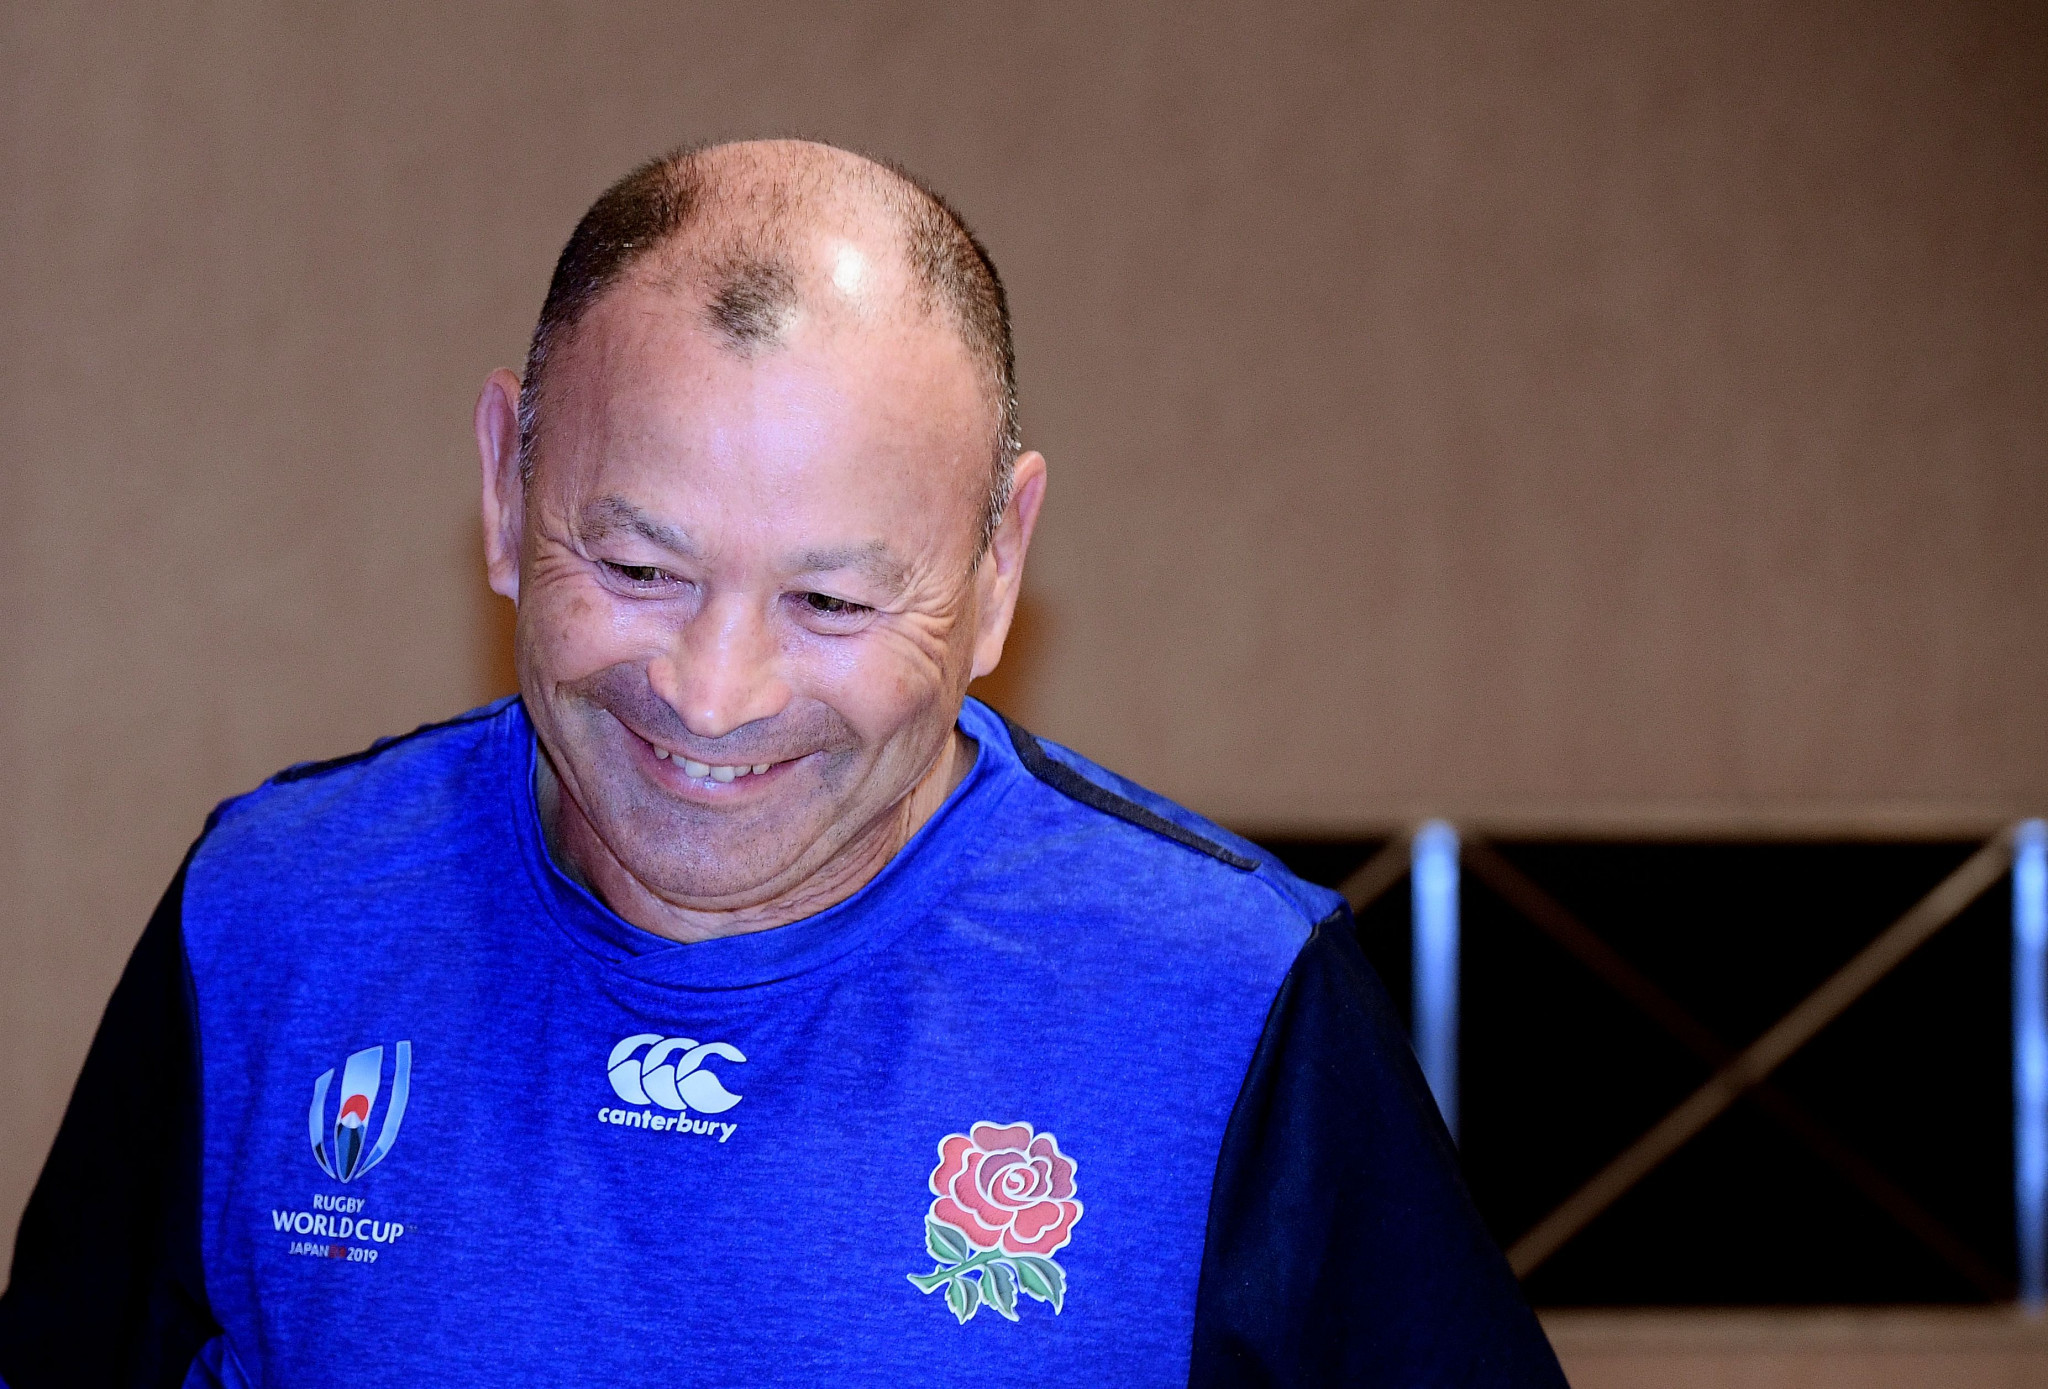 England coach Eddie Jones will know his team must improve on their error-strewn showing against Tonga – he's made 10 changes for the game with the United States on Thursday (September 26)